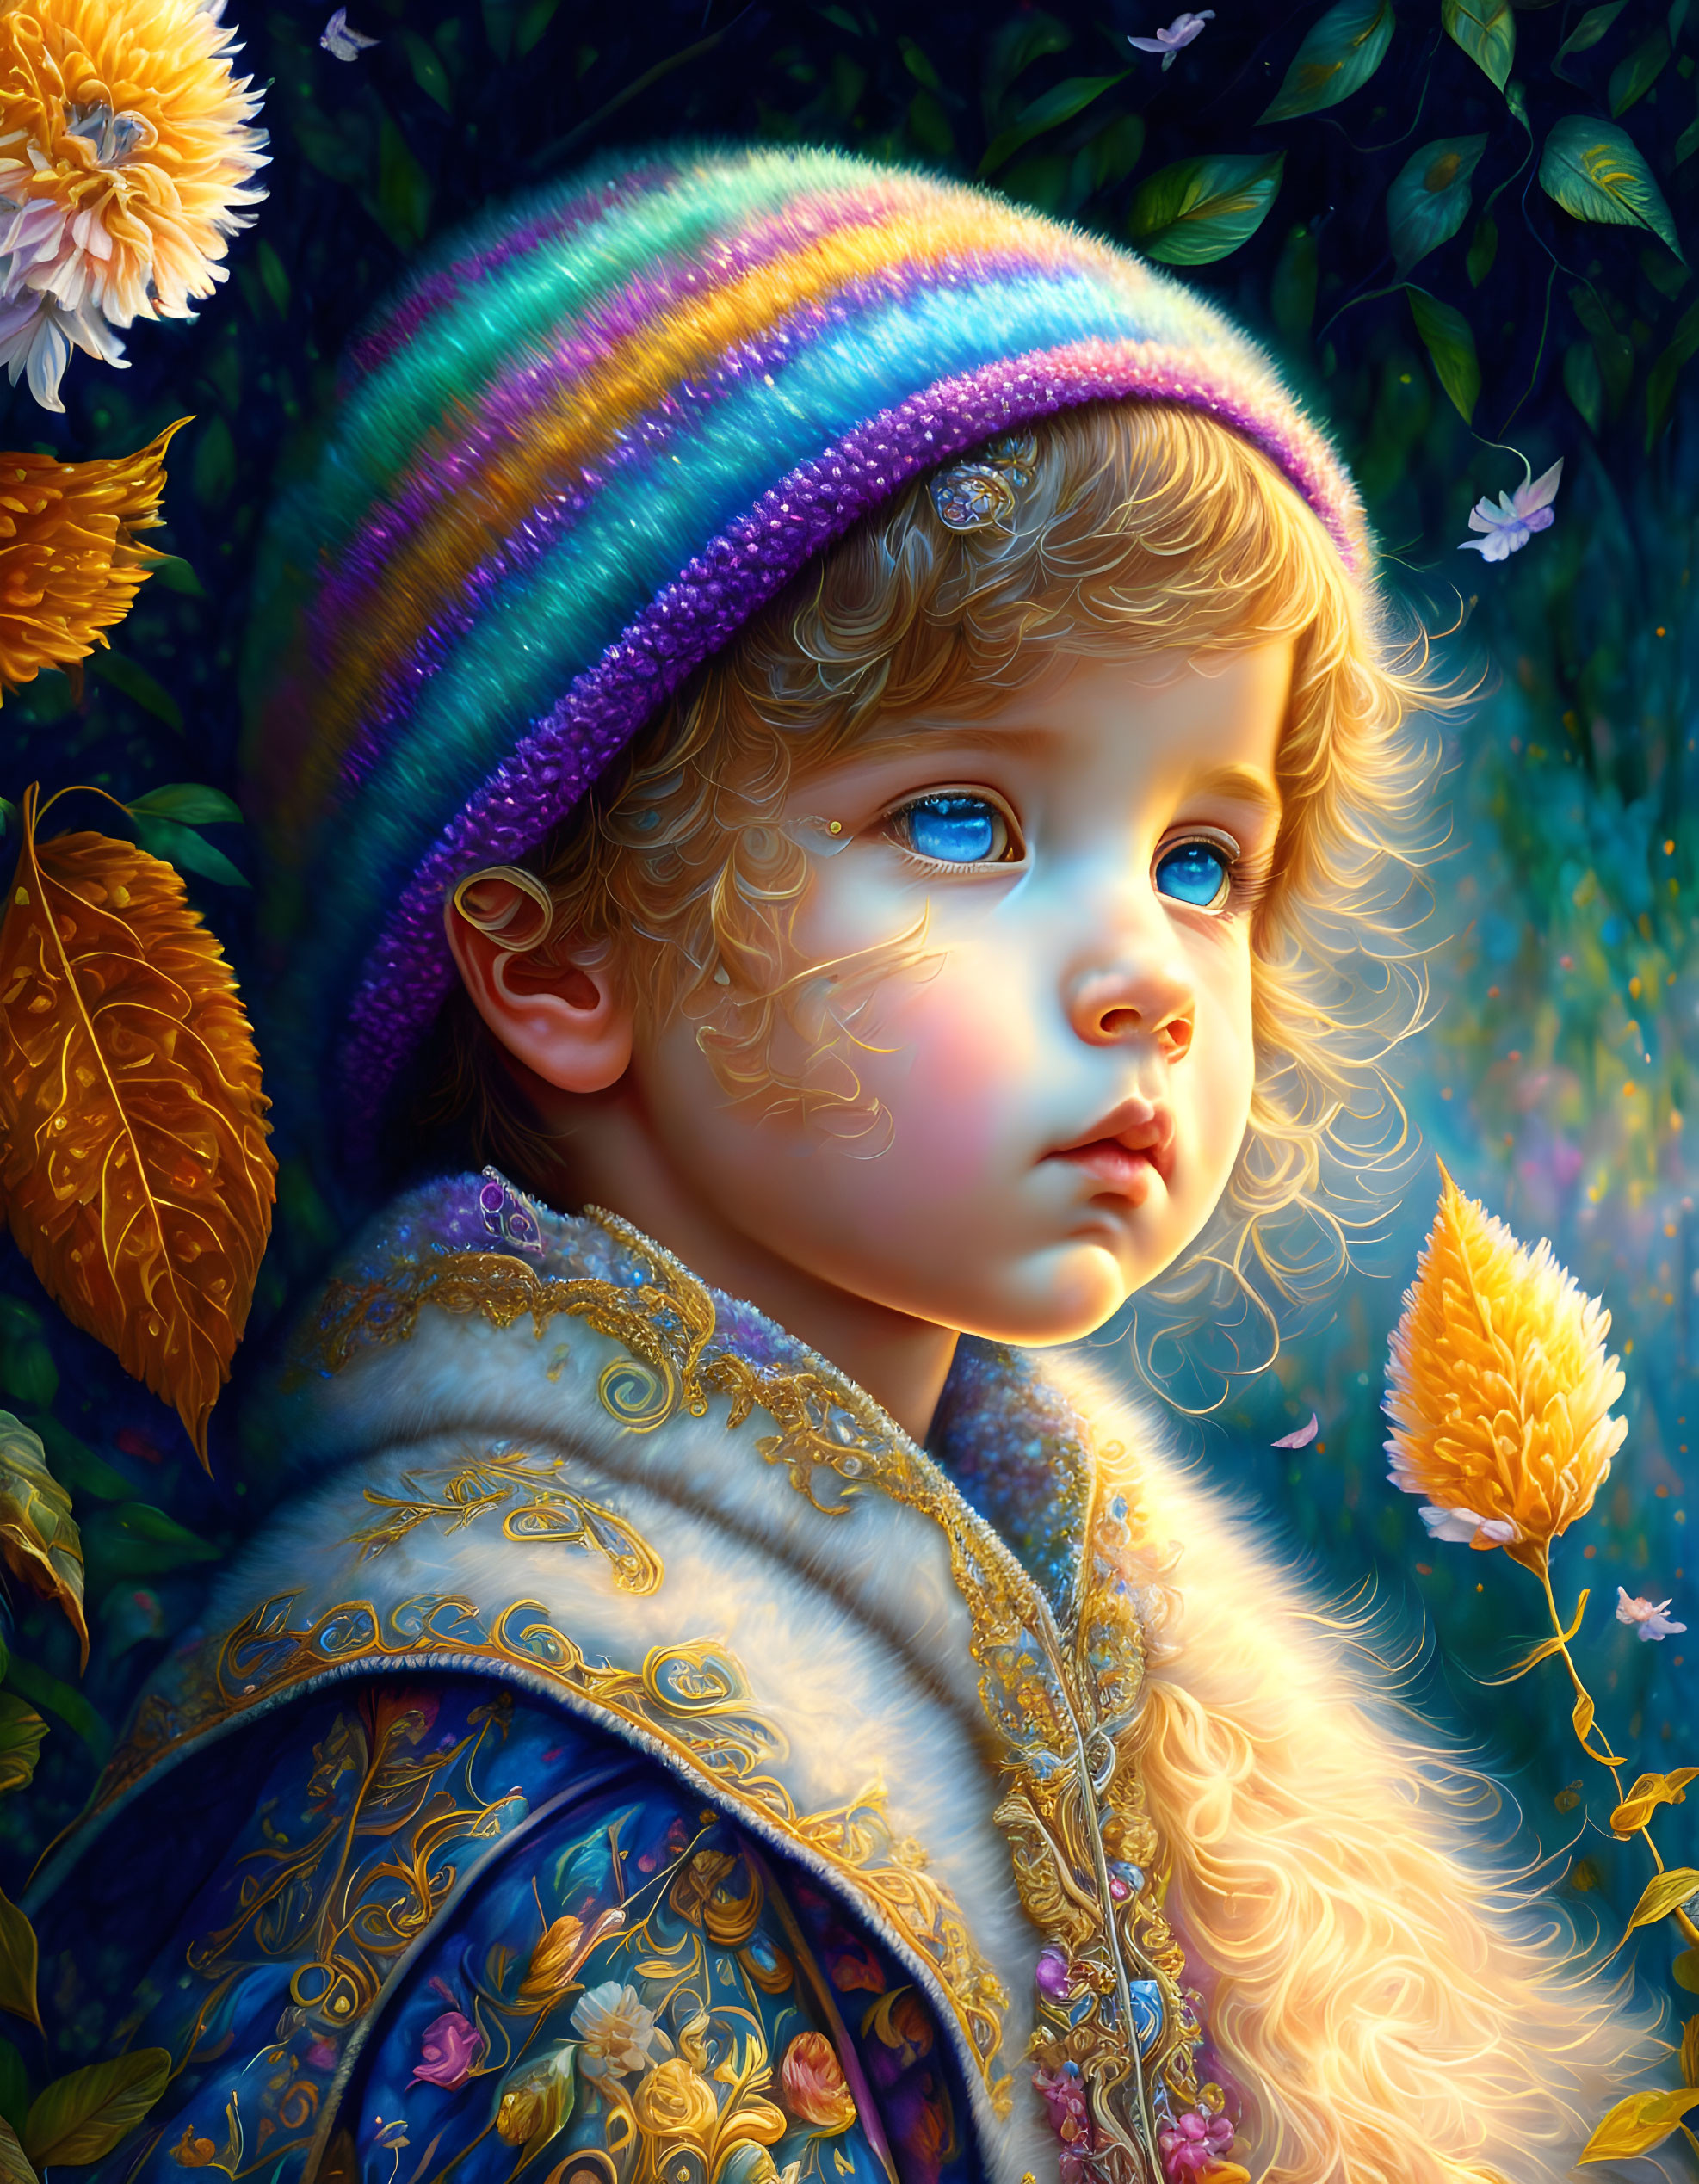 Child with Blue Eyes in Colorful Knit Cap and Embroidered Jacket in Magical Forest